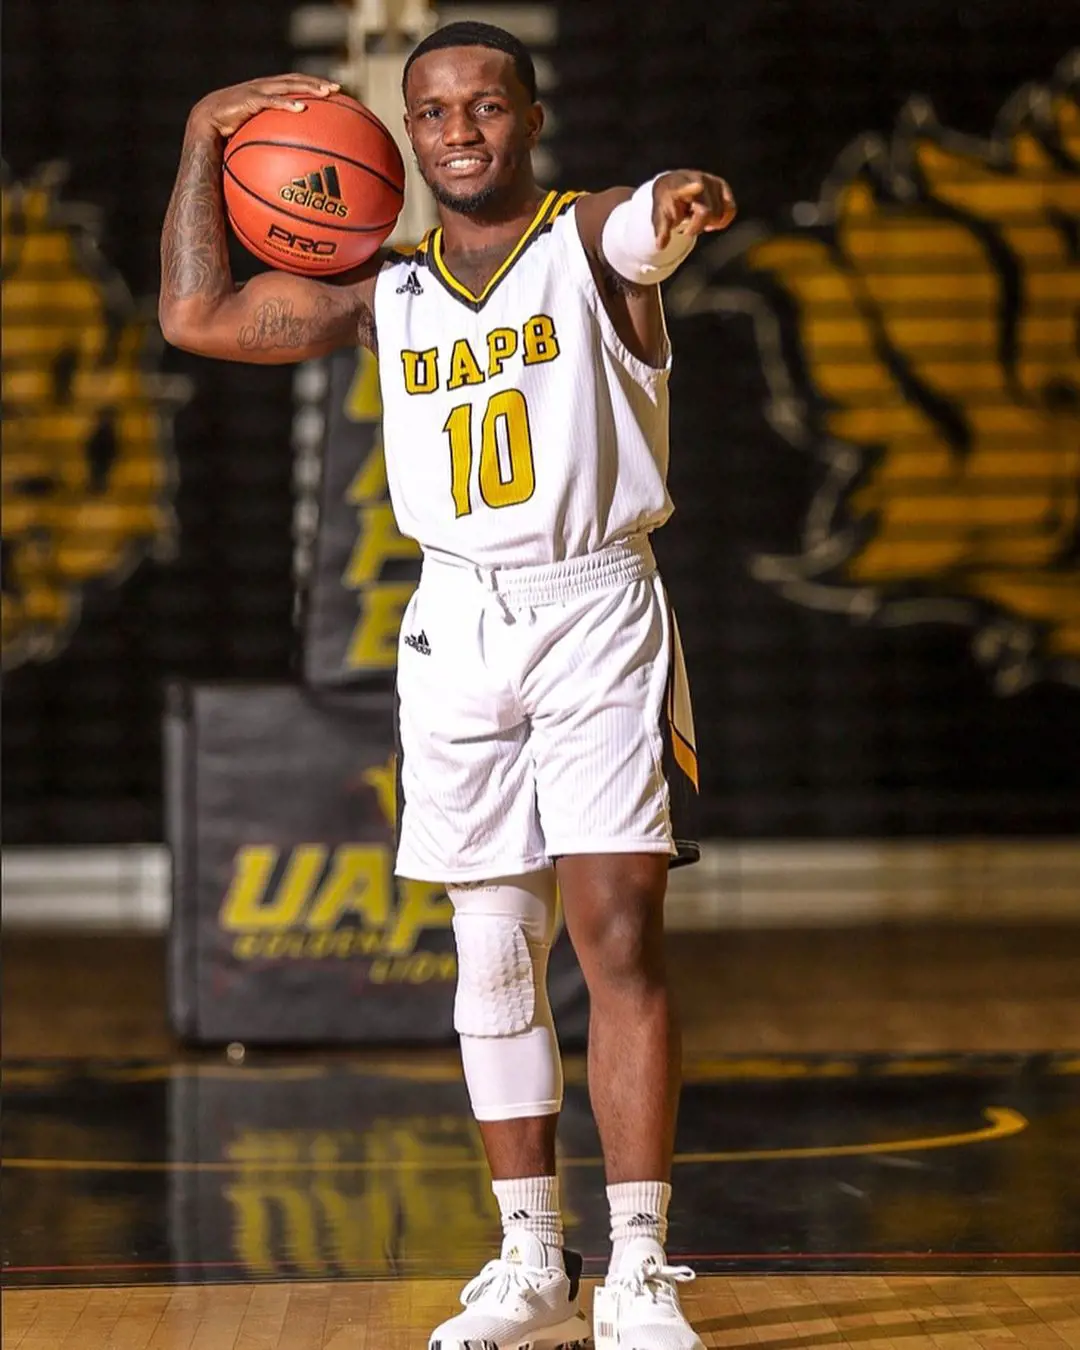 Jamil posing for a picture at the University of Arkansas at Pine Bluff on October 30,2019.